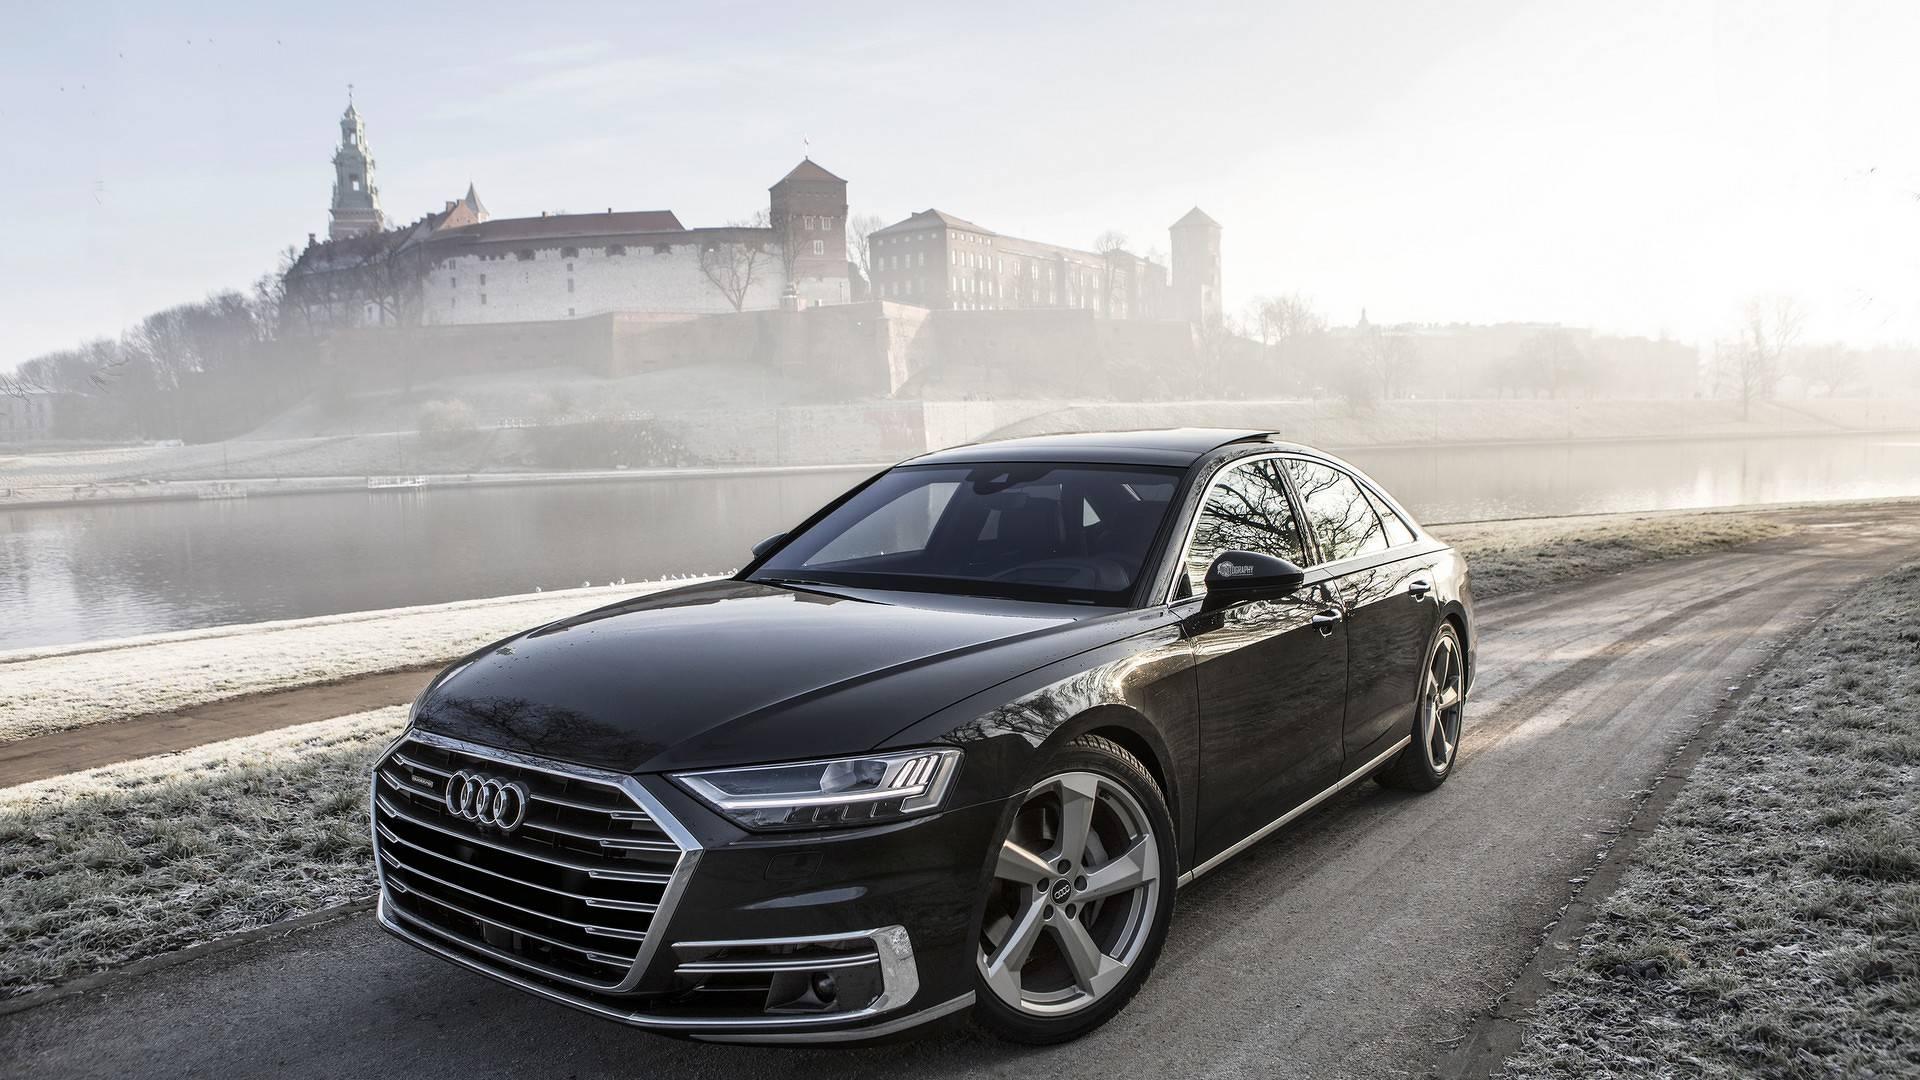 You Don't Have To Like The Audi A8 To Enjoy These Stunning Image